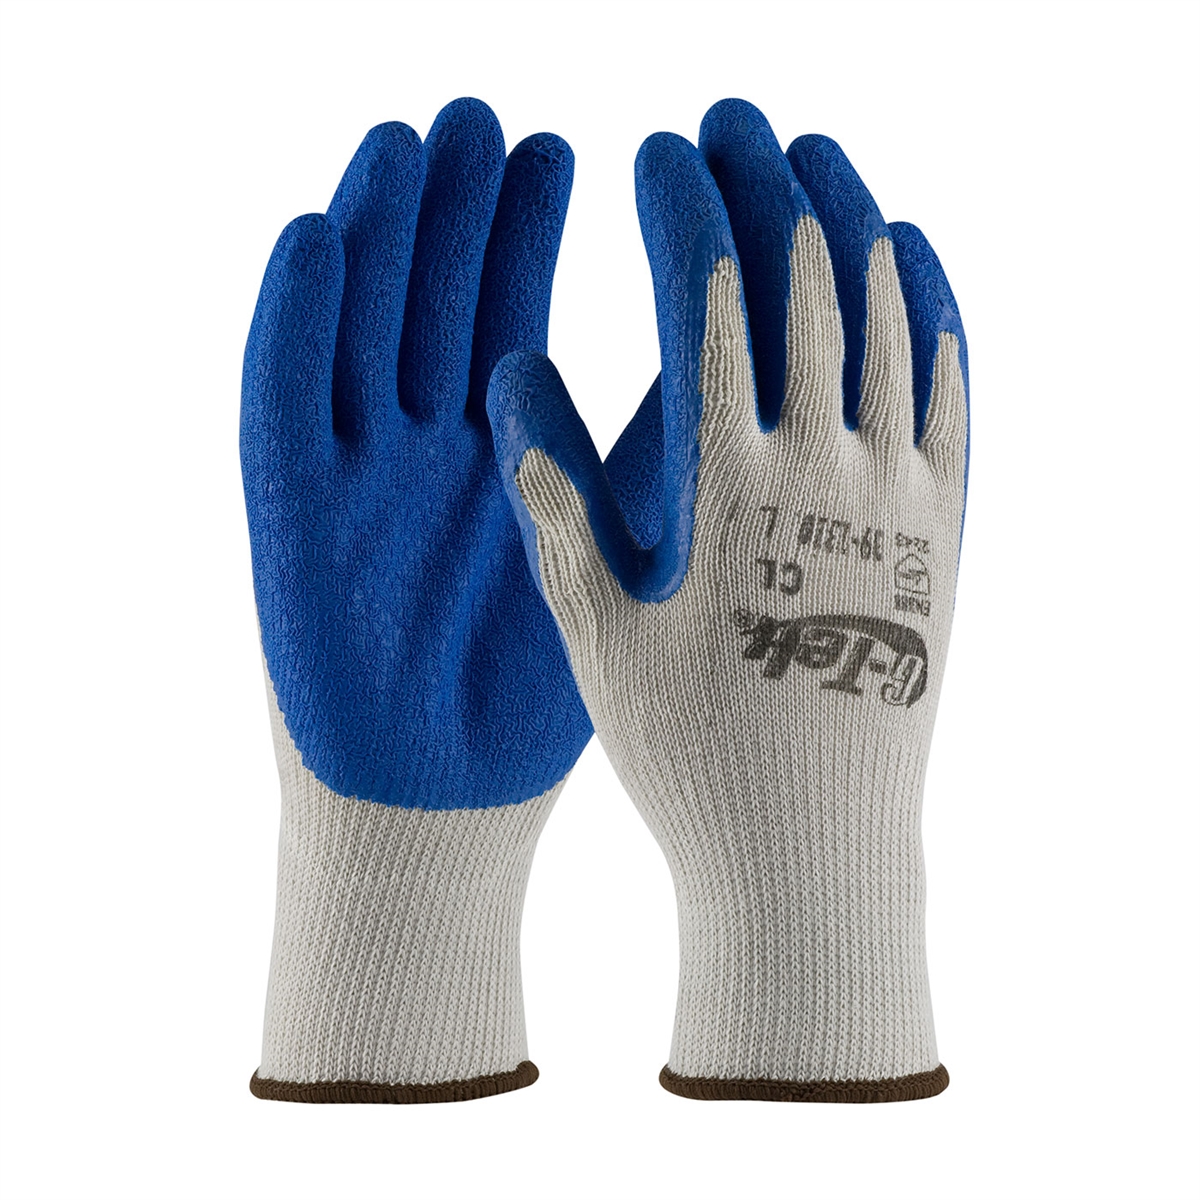 POWERGRAB Thermo Hi-Vis Microfinish Grip Gloves, Coated Work Gloves